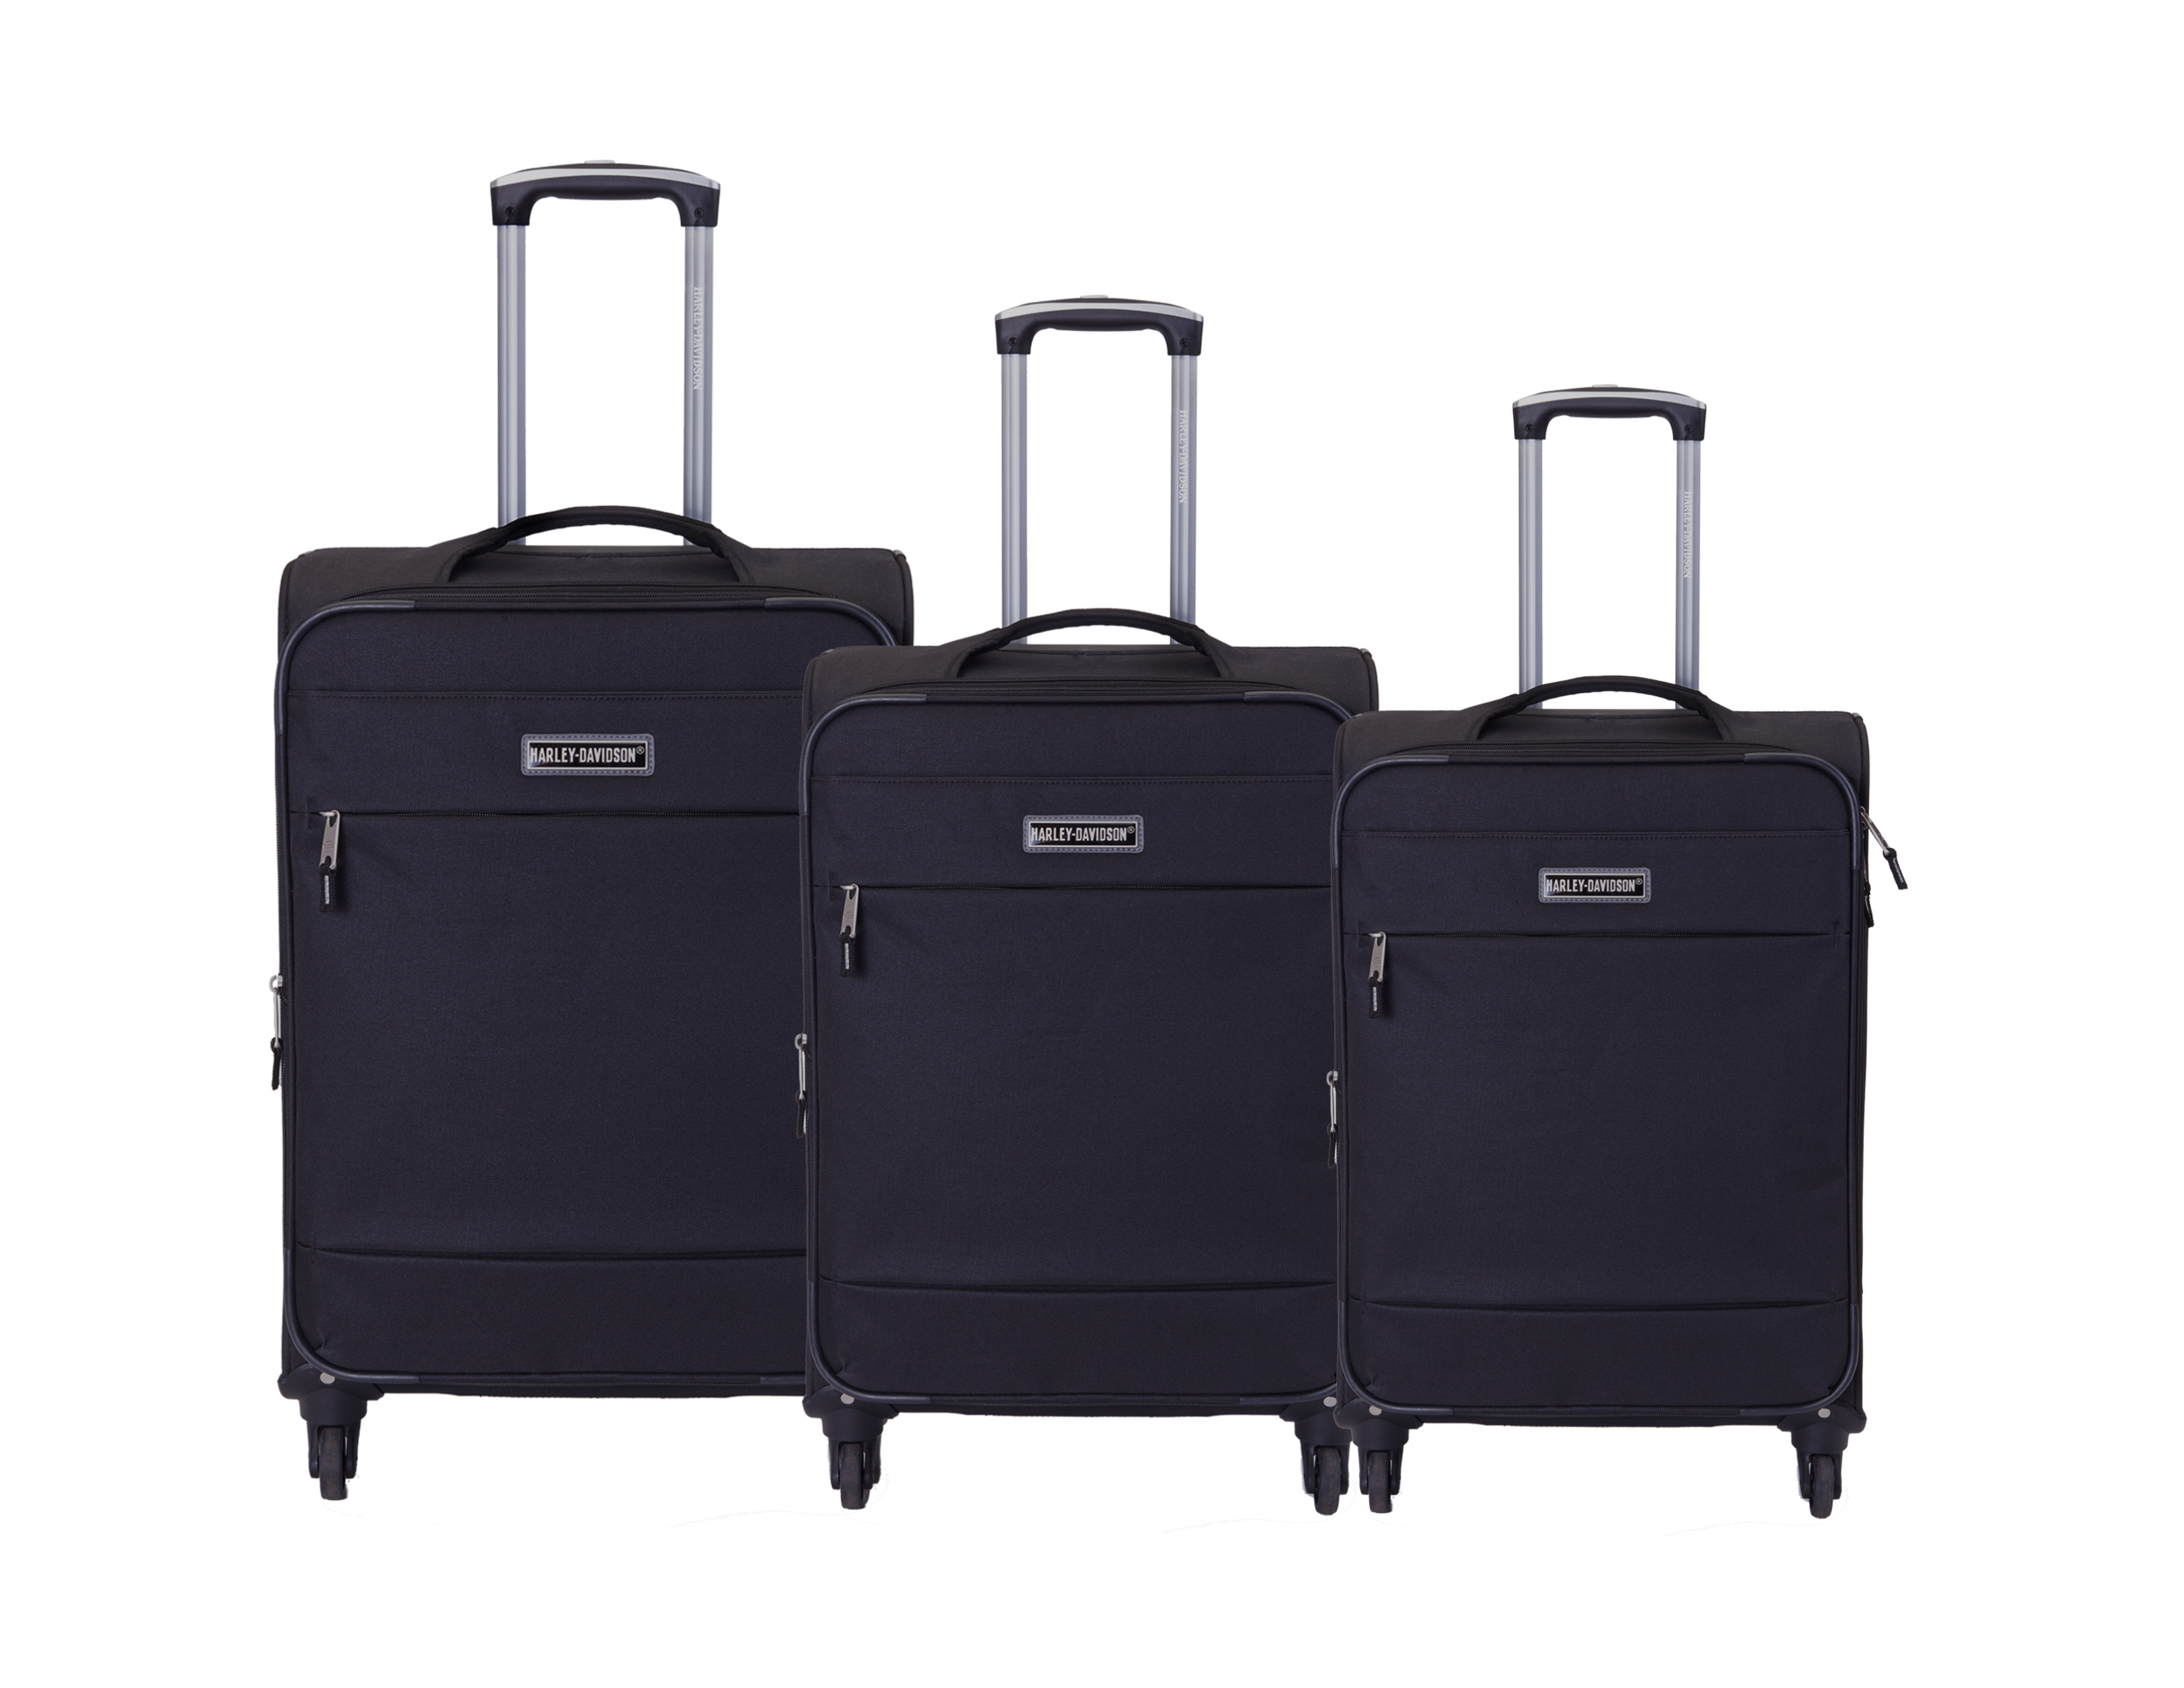 Harley-Davidson® BY ATHALON “MIDNIGHTRIDER IV” SOFTSIDE LUGGAGE COLLECTION